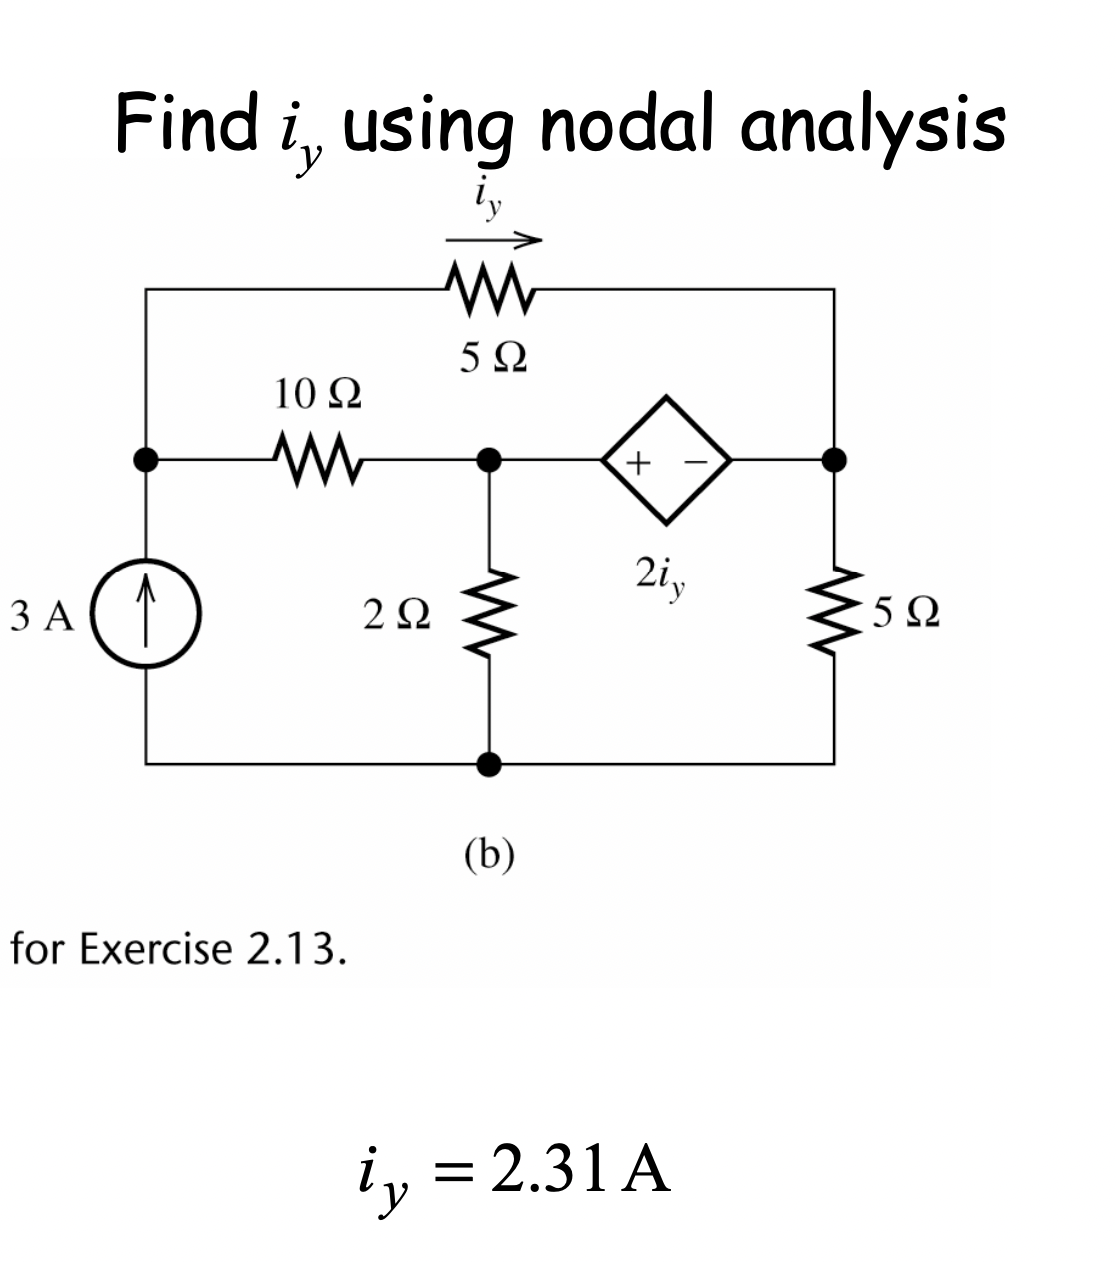 Find i, using nodal analysis
ww
5Ω
3 A ( 1
10 22
www
for Exercise 2.13.
252
(b)
+
2iy
iy = 2.31 A
59